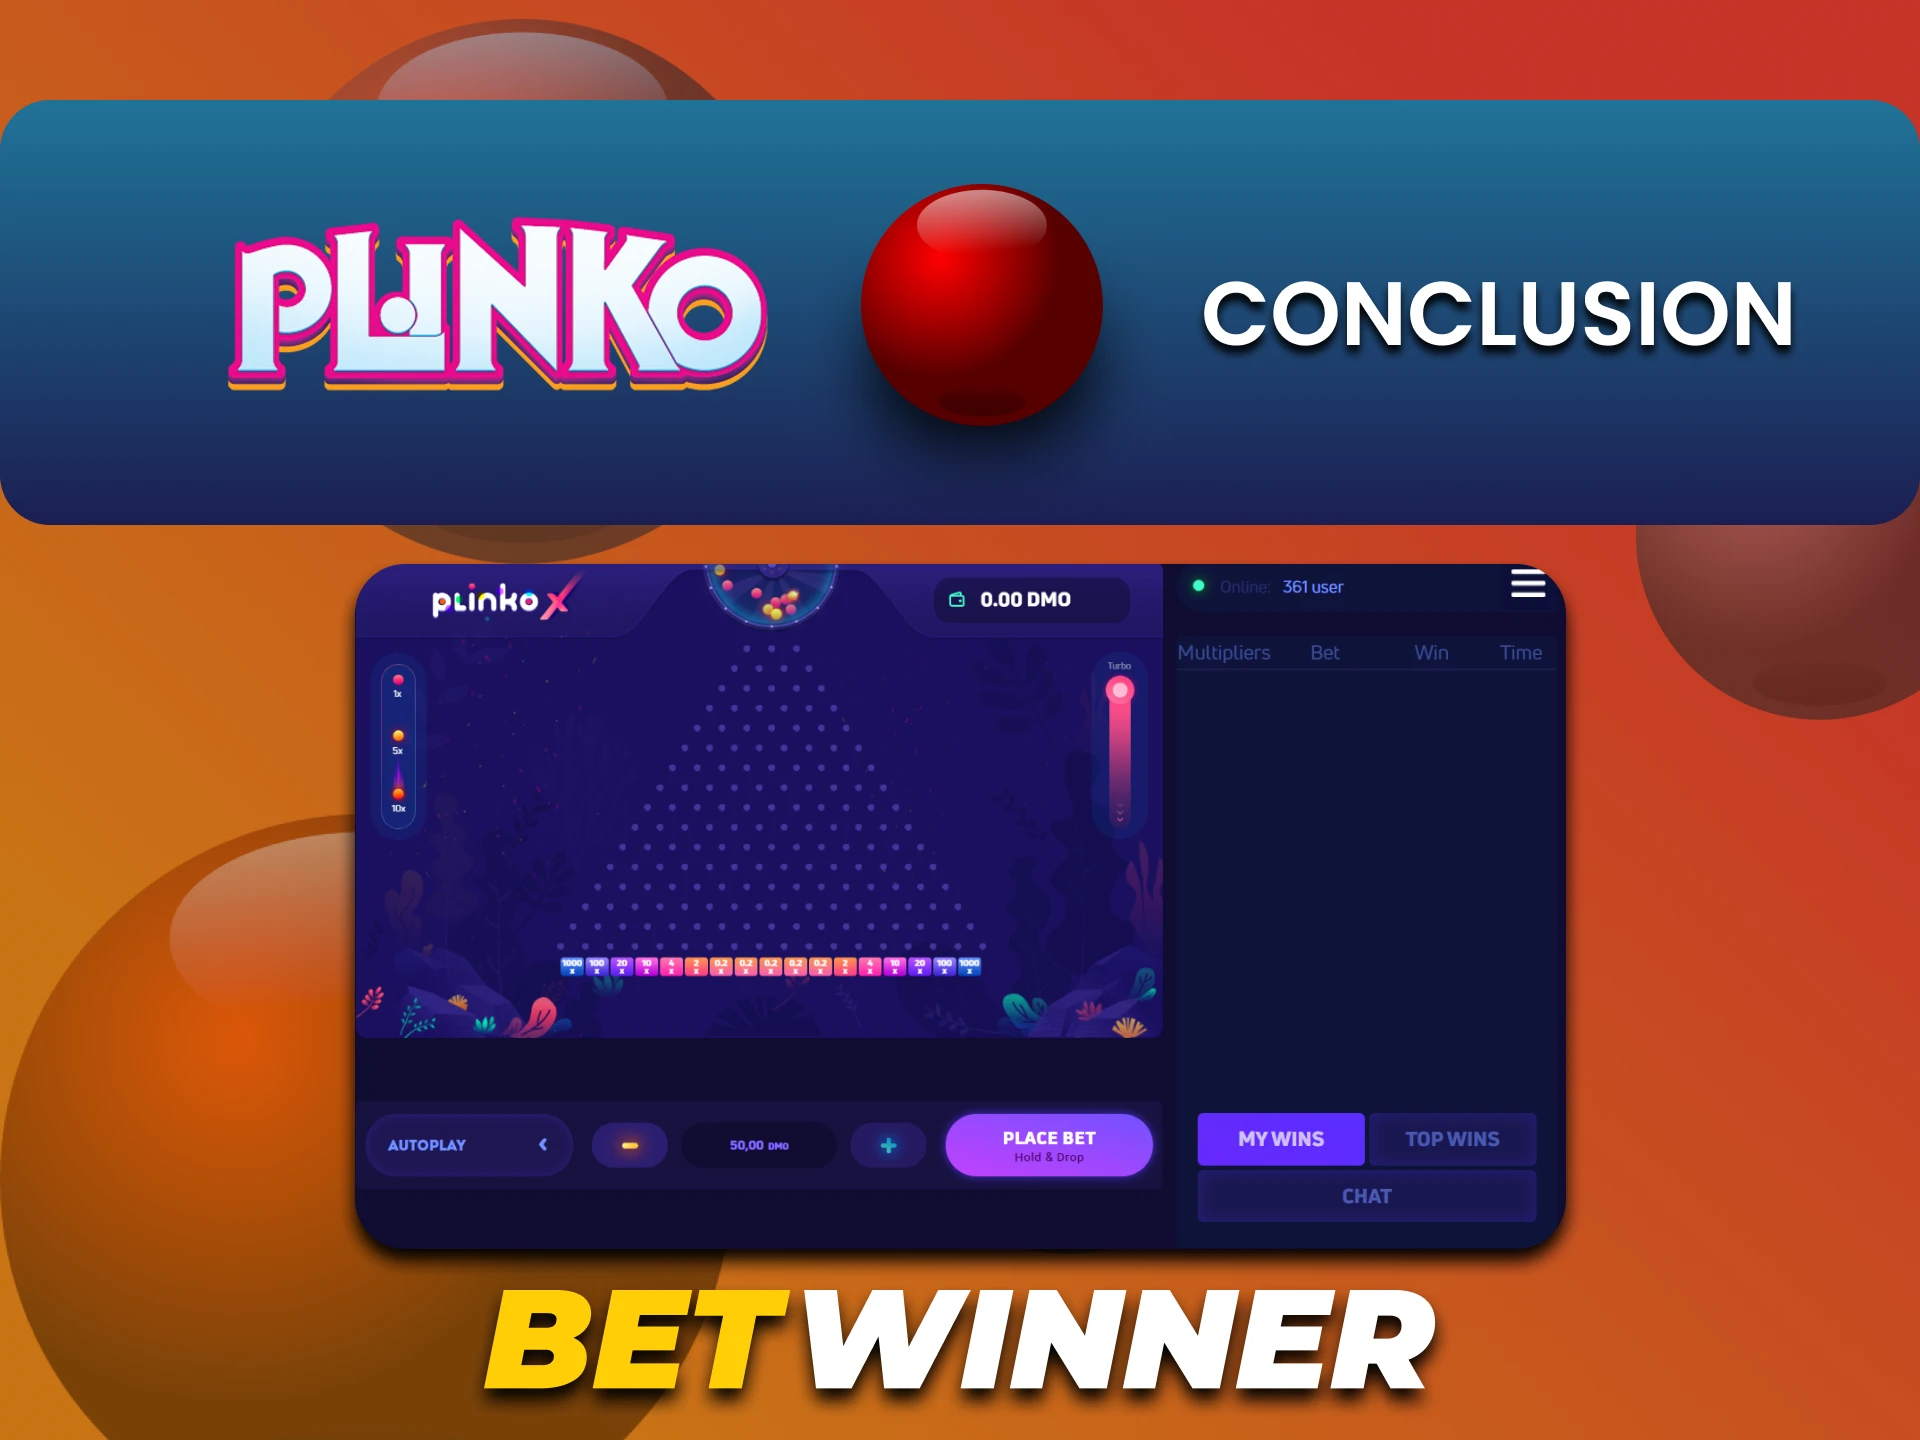 Betwinner is the choice of many users for playing Plinko.